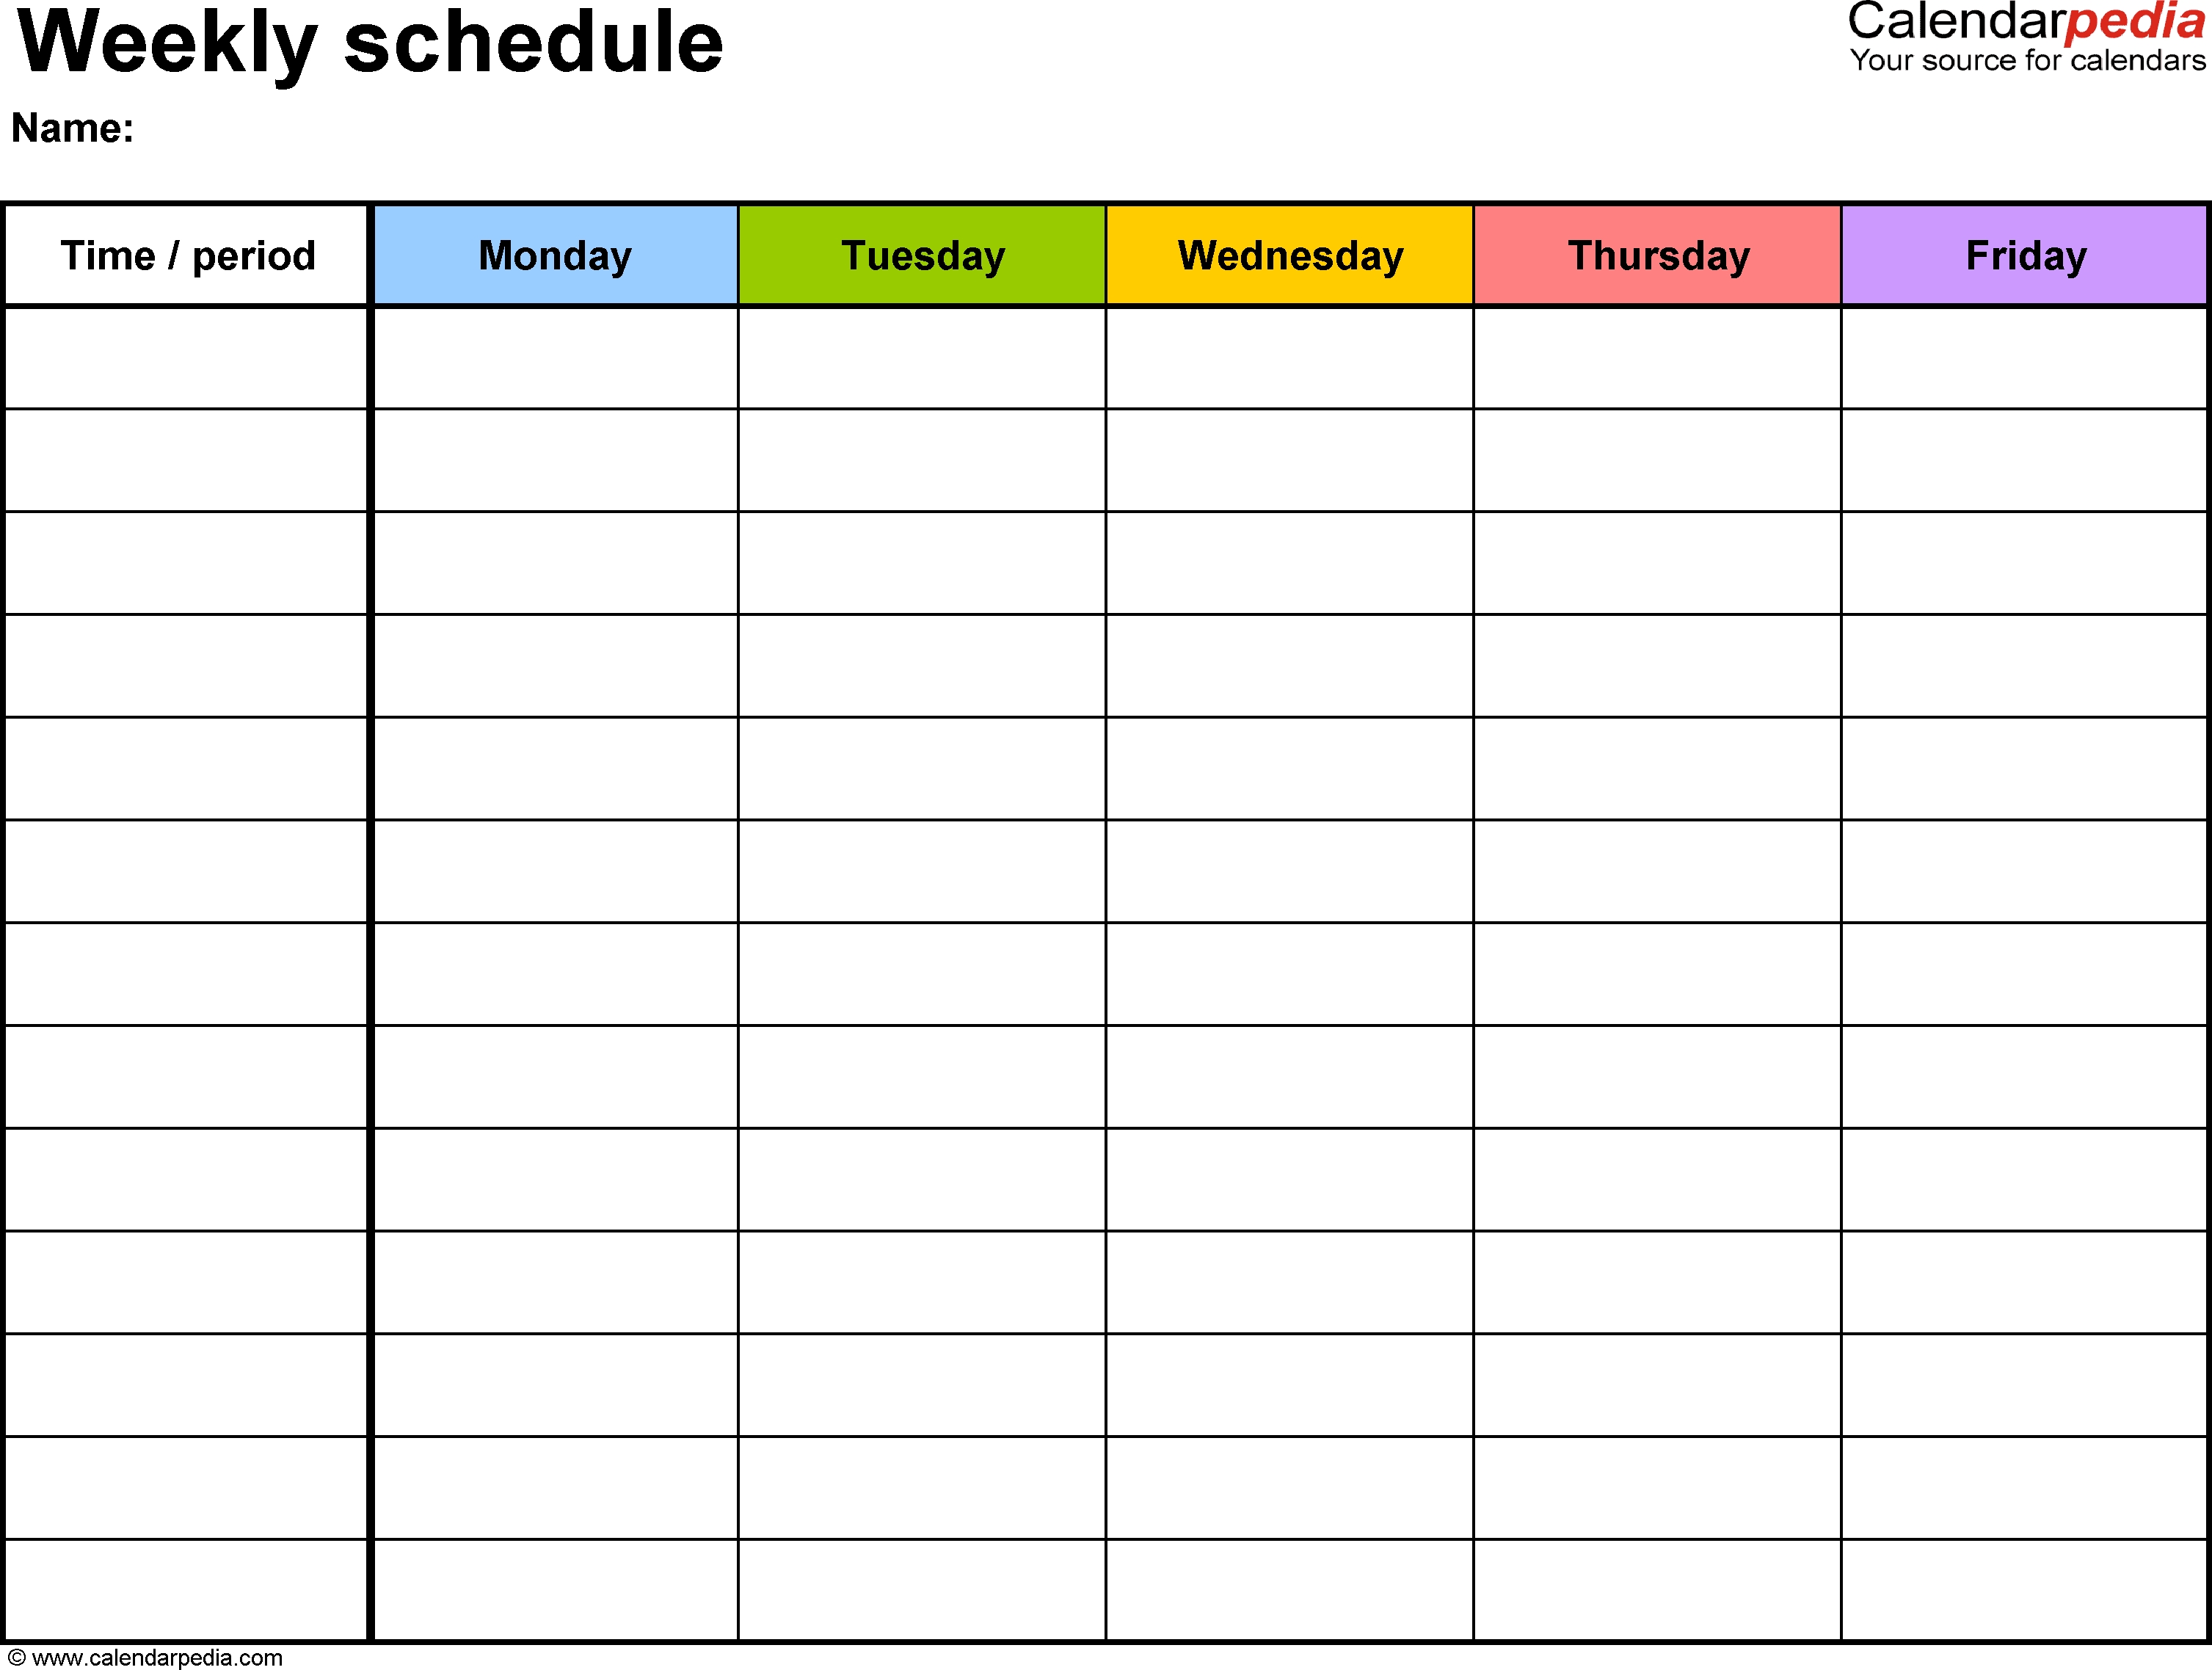 Weekly Schedule Template For Word Version 1: Landscape, 1-5 Day Weekly Calendar Template